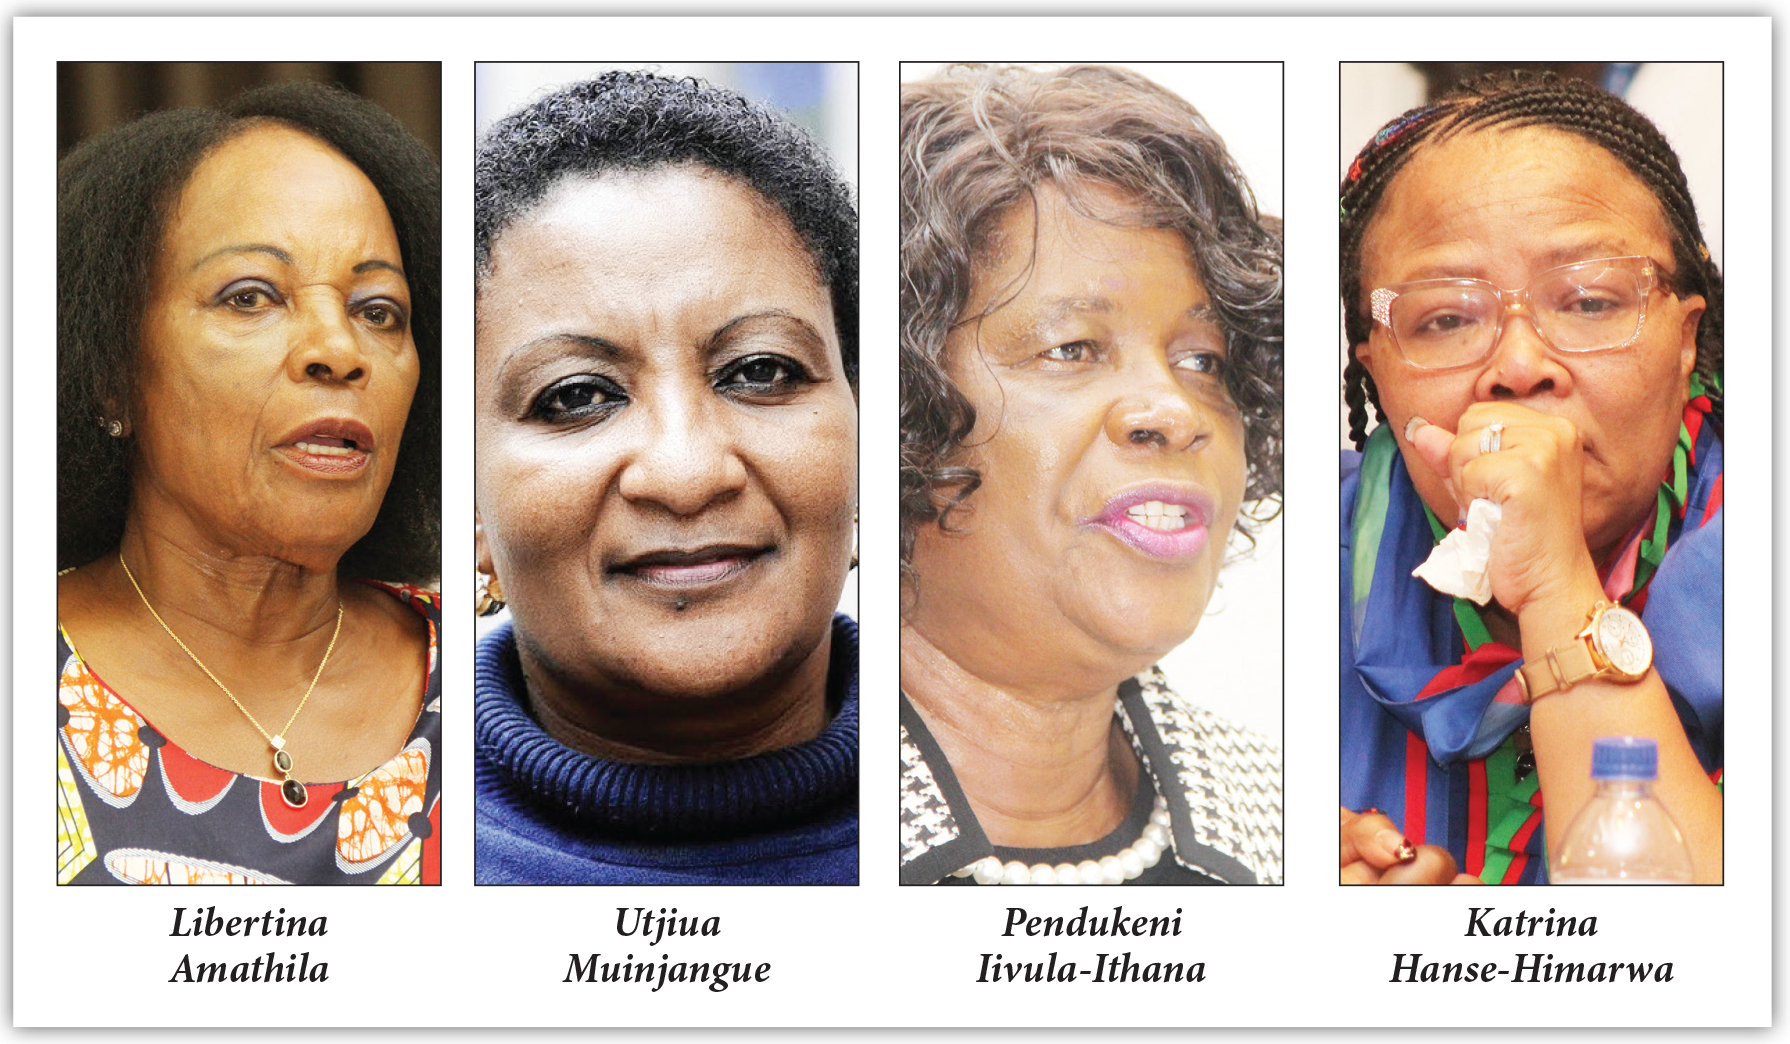 Meritocracy over gender…women weigh in on Swapo female candidate